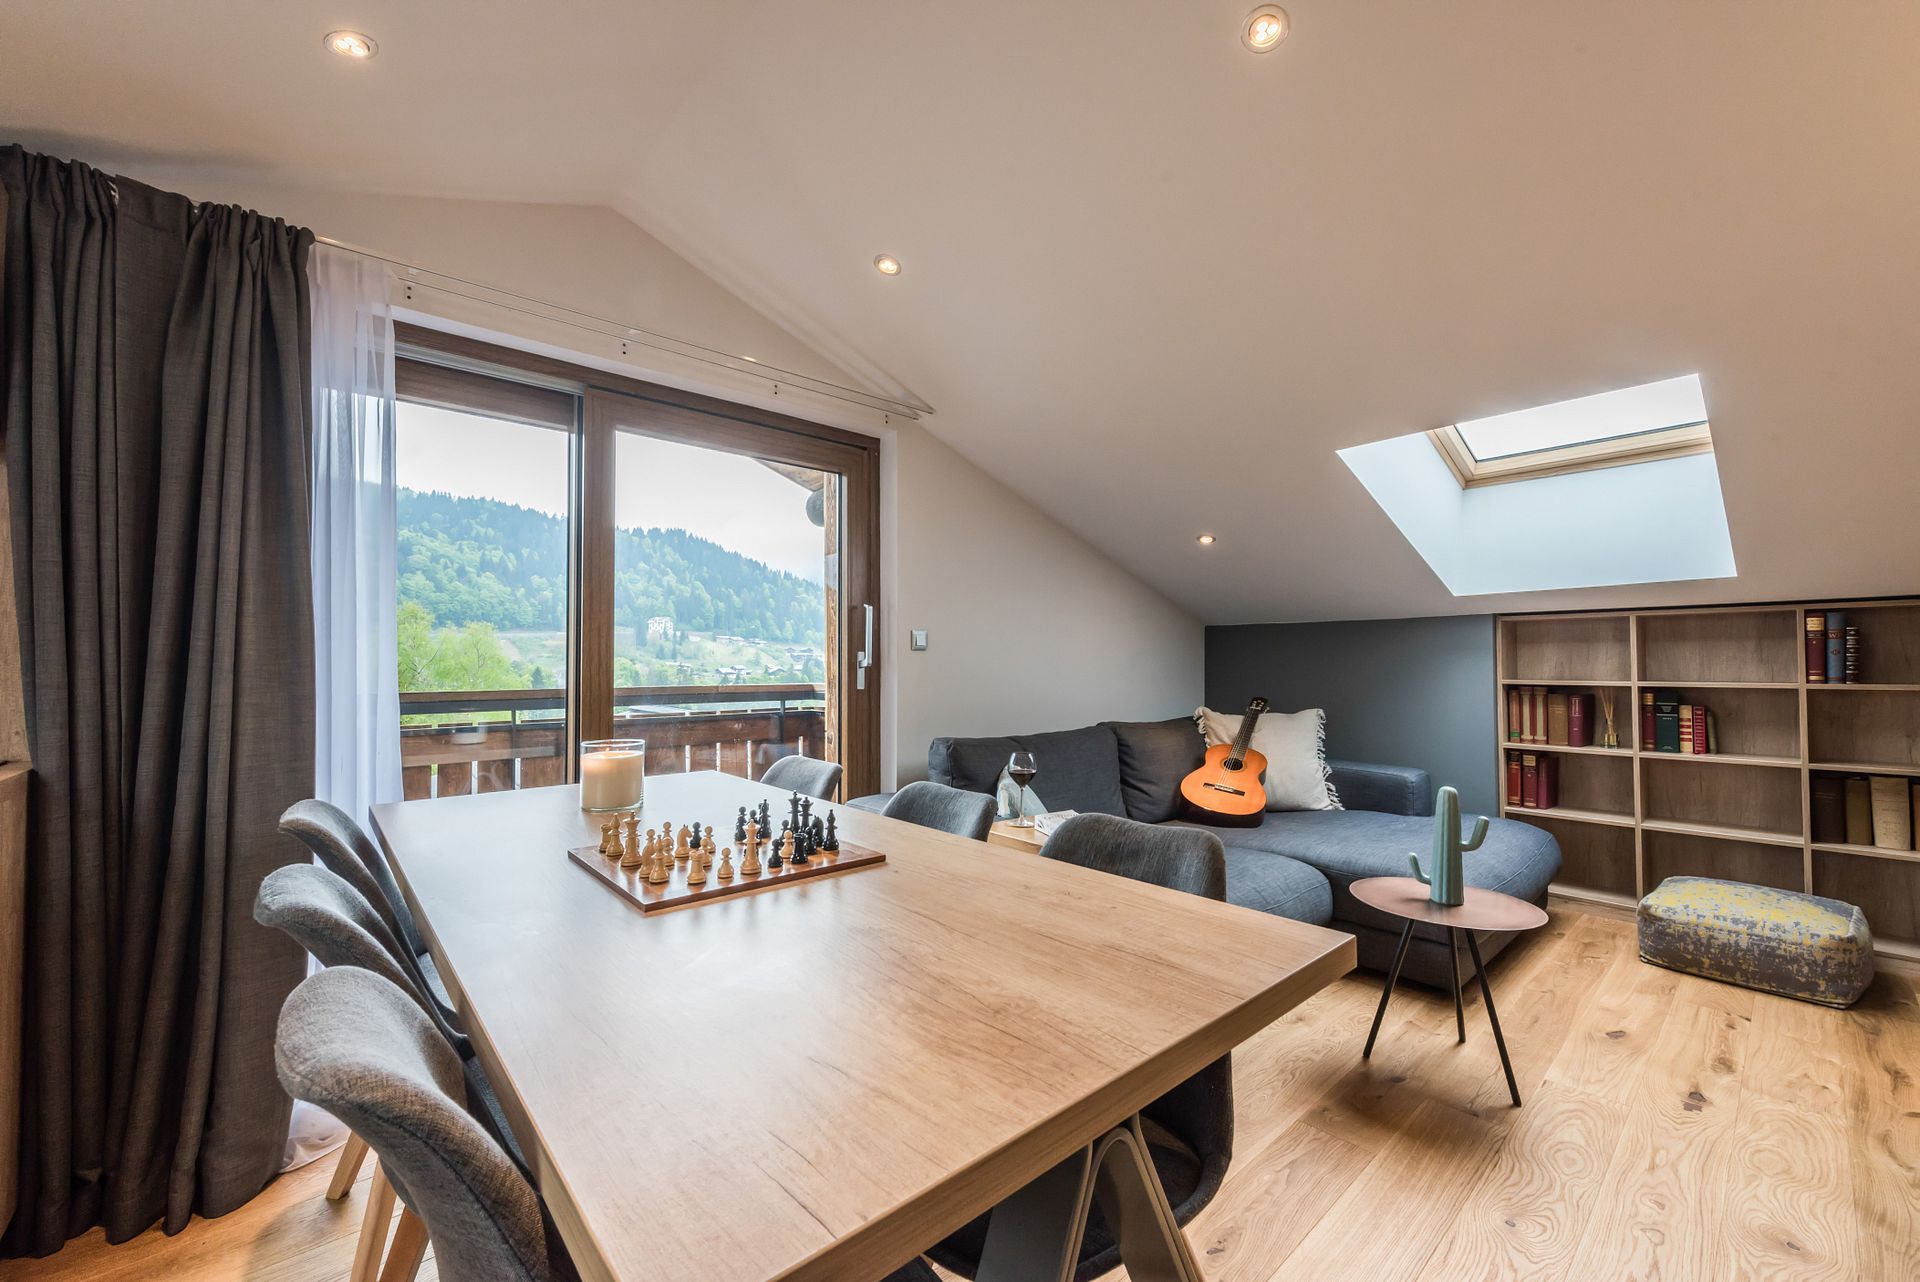 3 bed Penthouse For Sale in Portes du Soleil, French Alps